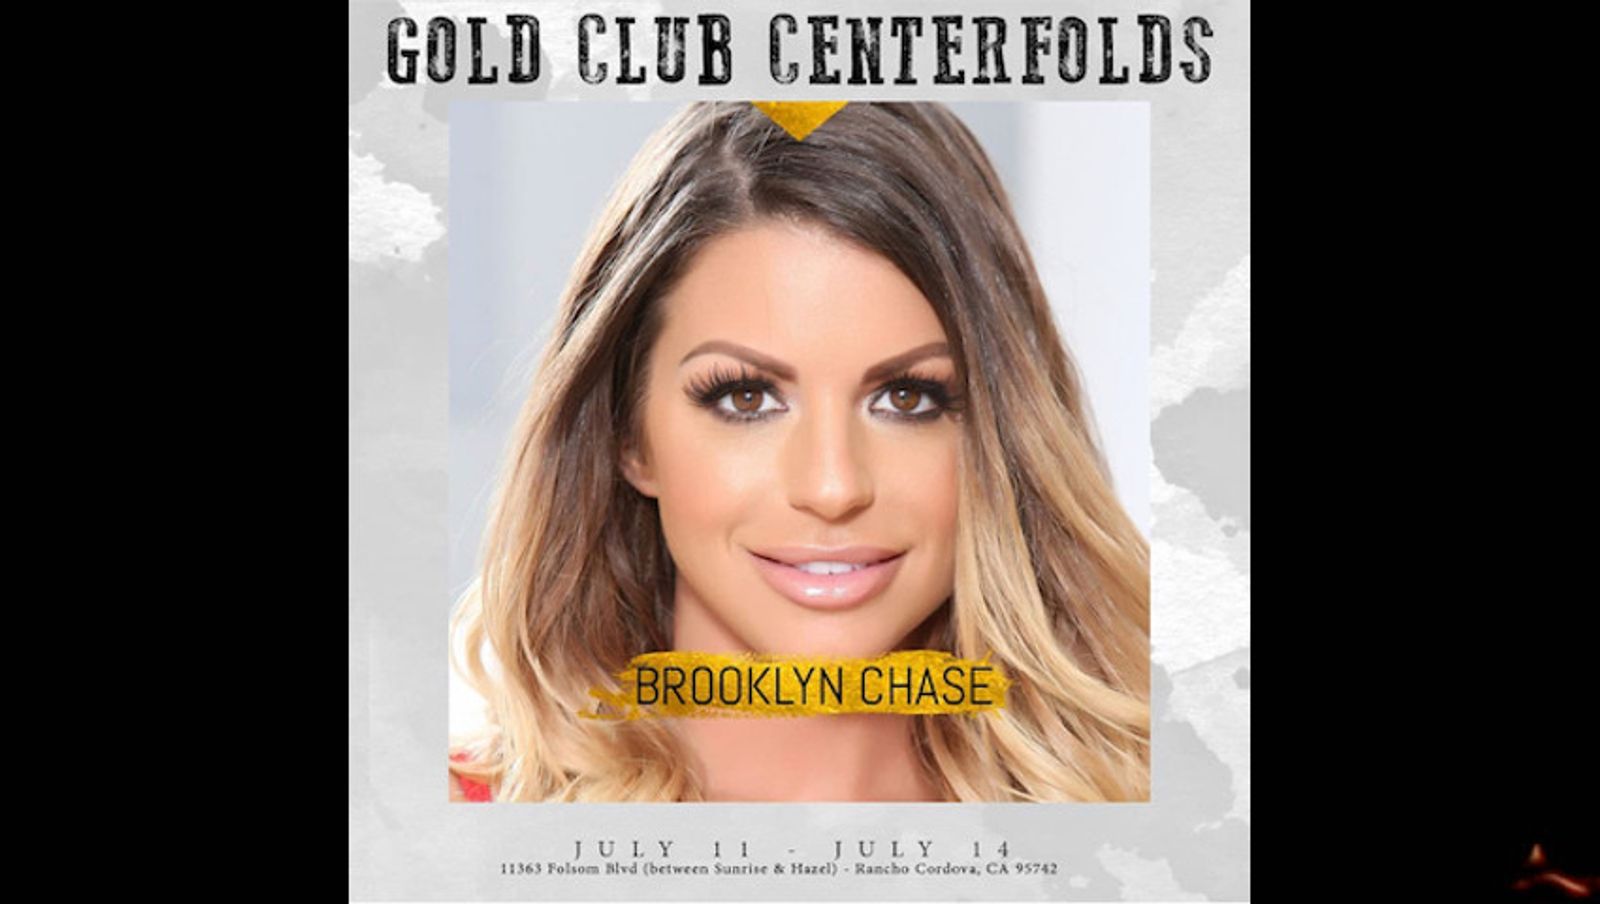 Brooklyn Chase to Feature at Gold Club Centerfolds